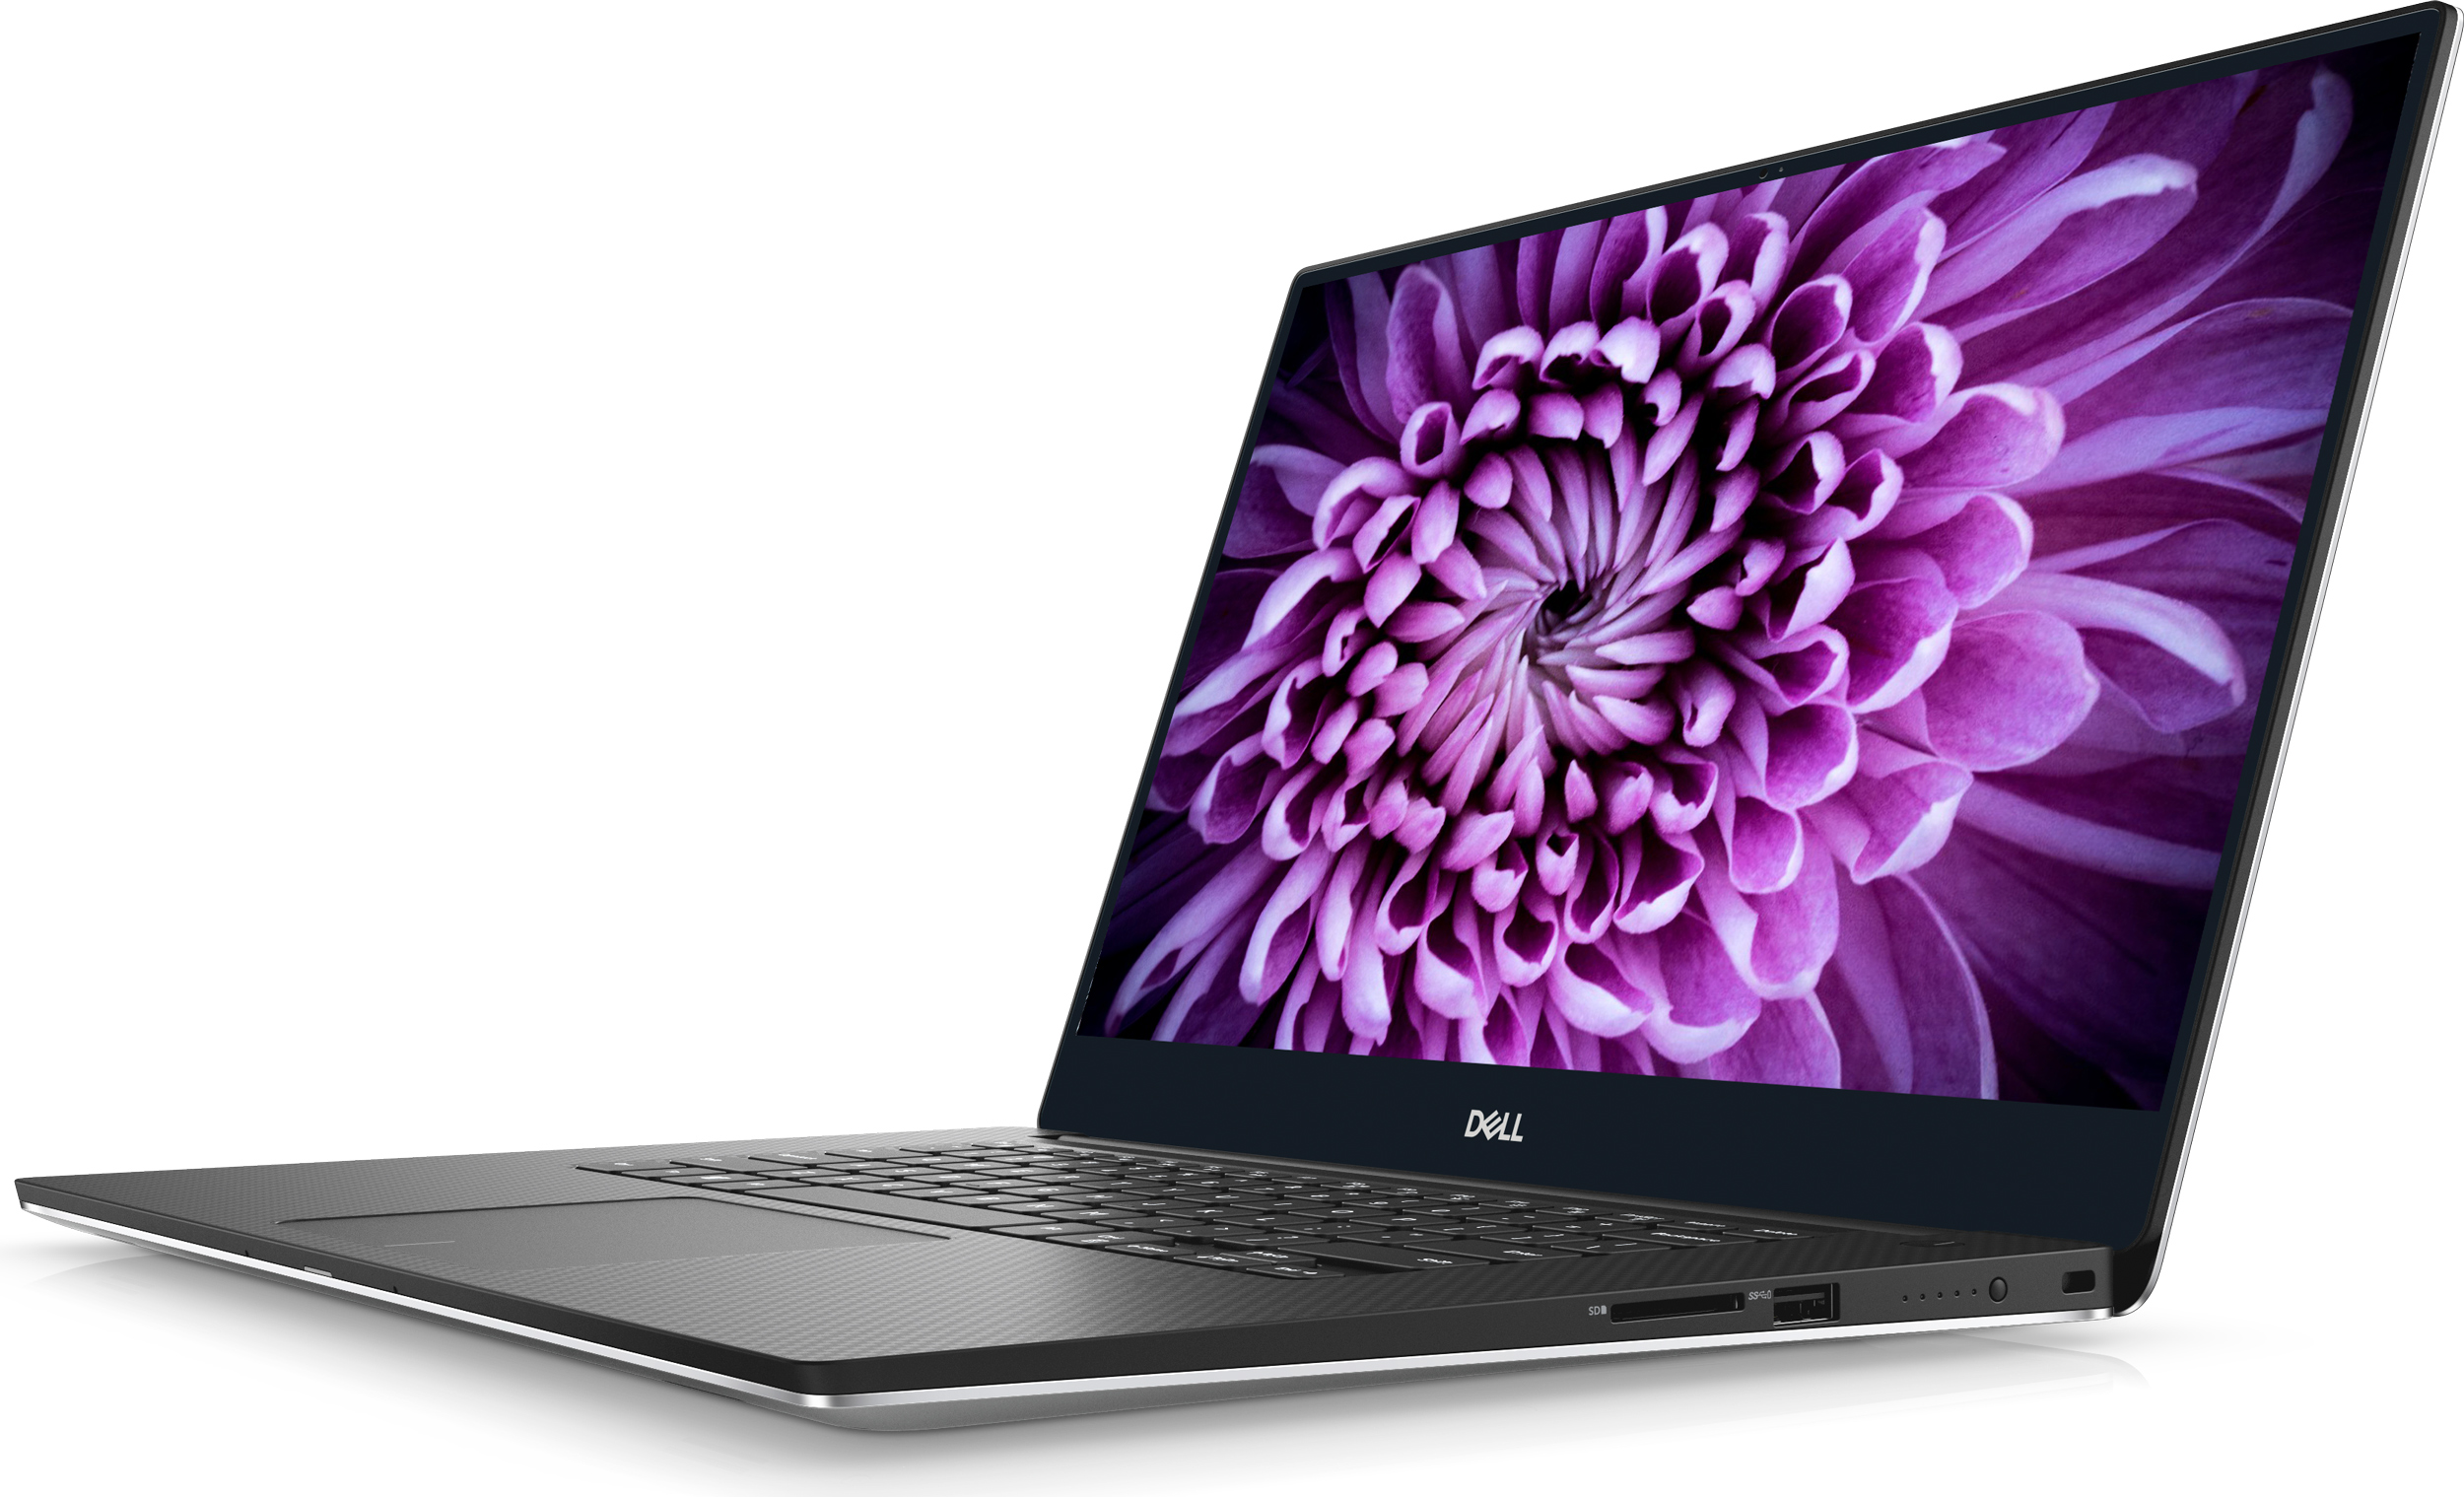 Dell Xps 15 7590 Specification